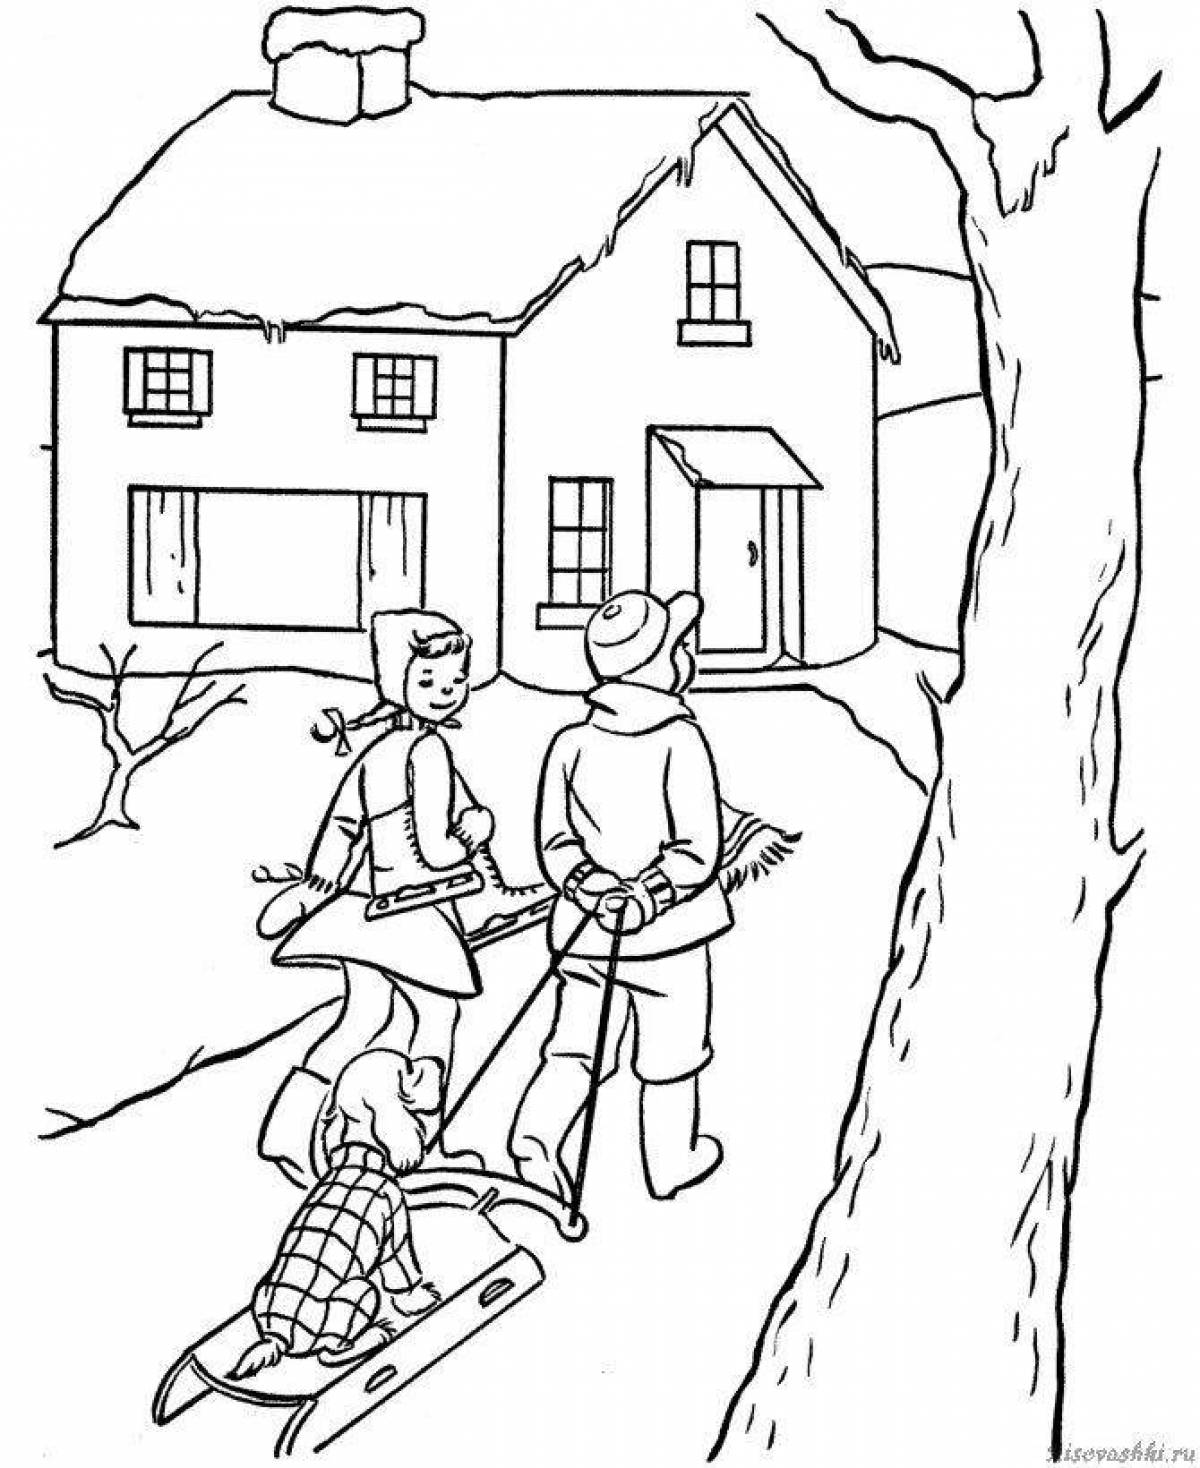 Deluxe coloring book about agricultural work in winter